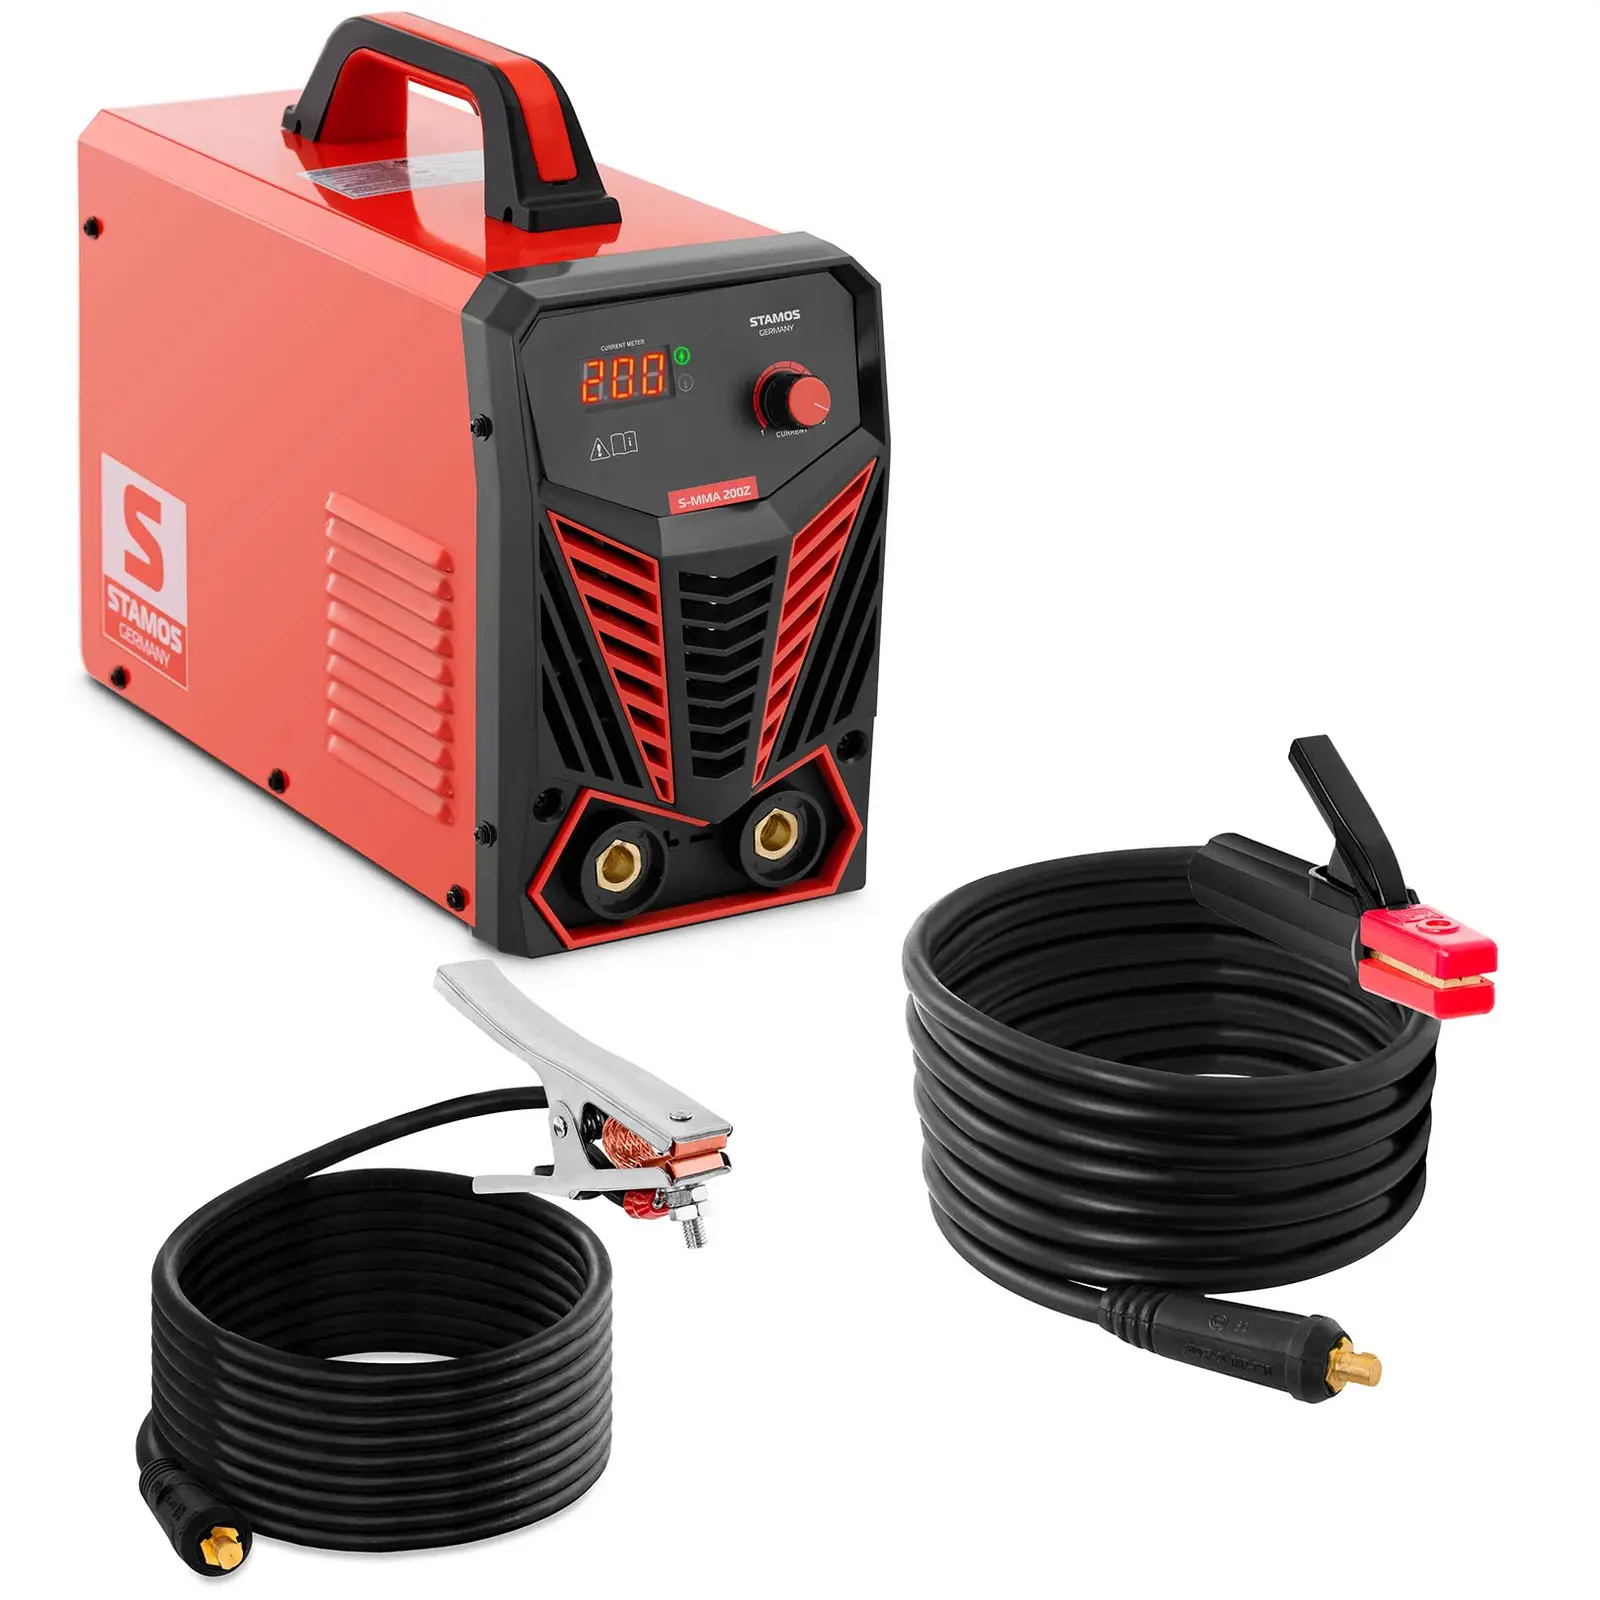 Arc Welder - IGBT - 200 A - 8 m cable - Duty Cycle 60 %